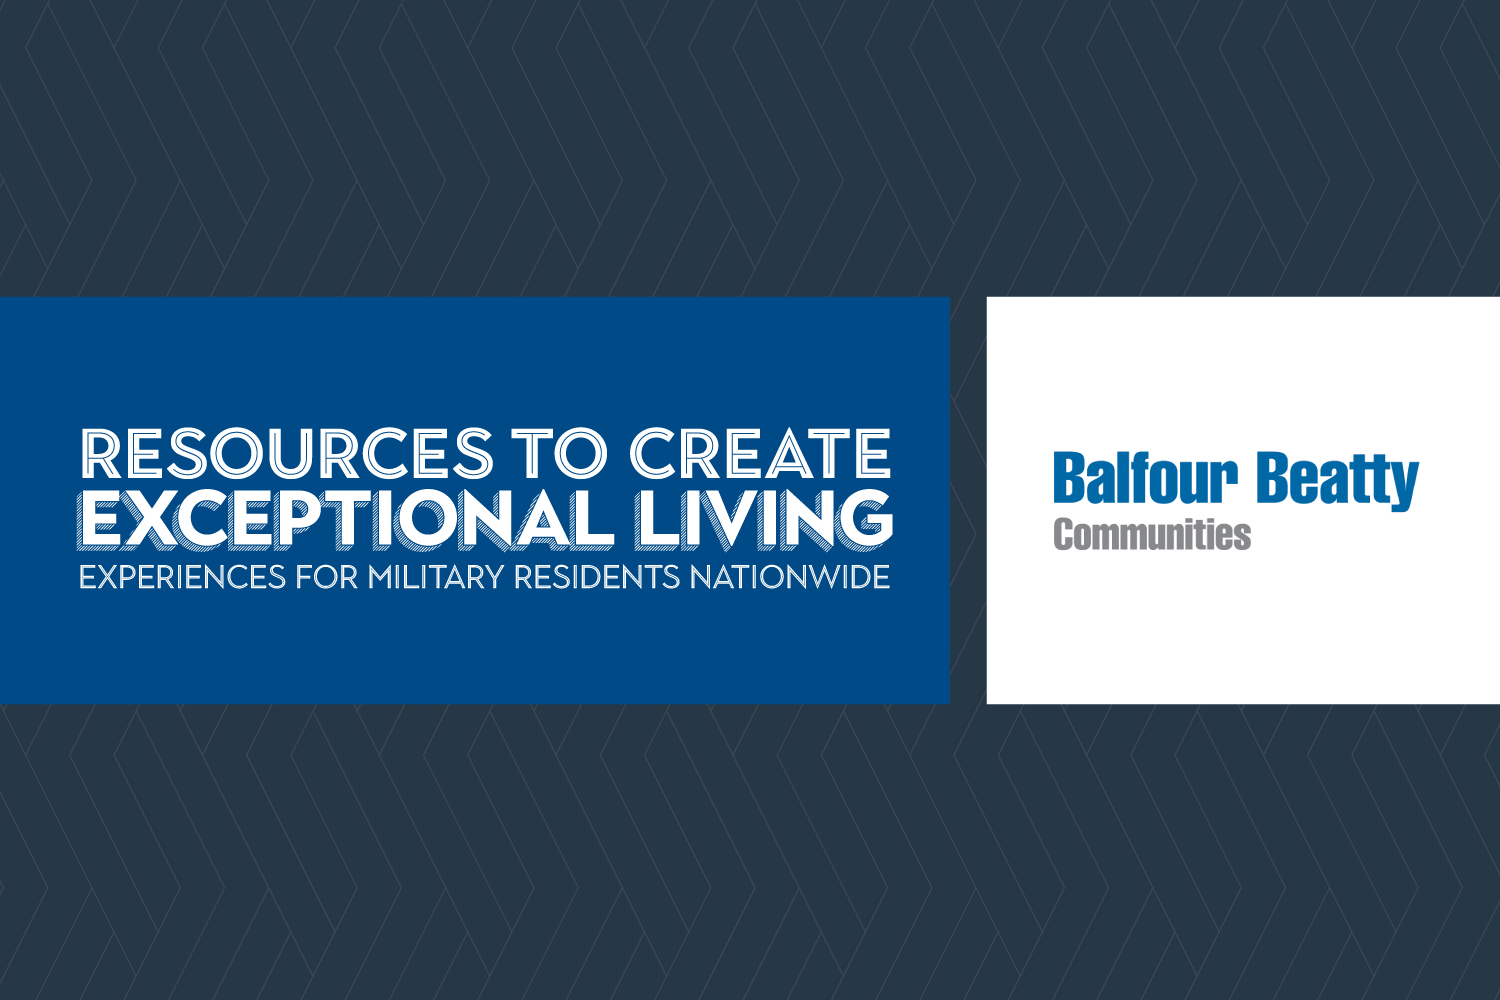 Balfour Beatty Communities Launches Innovative Programs, Resources  to Create Exceptional Living Experiences for Military Residents Nationwide